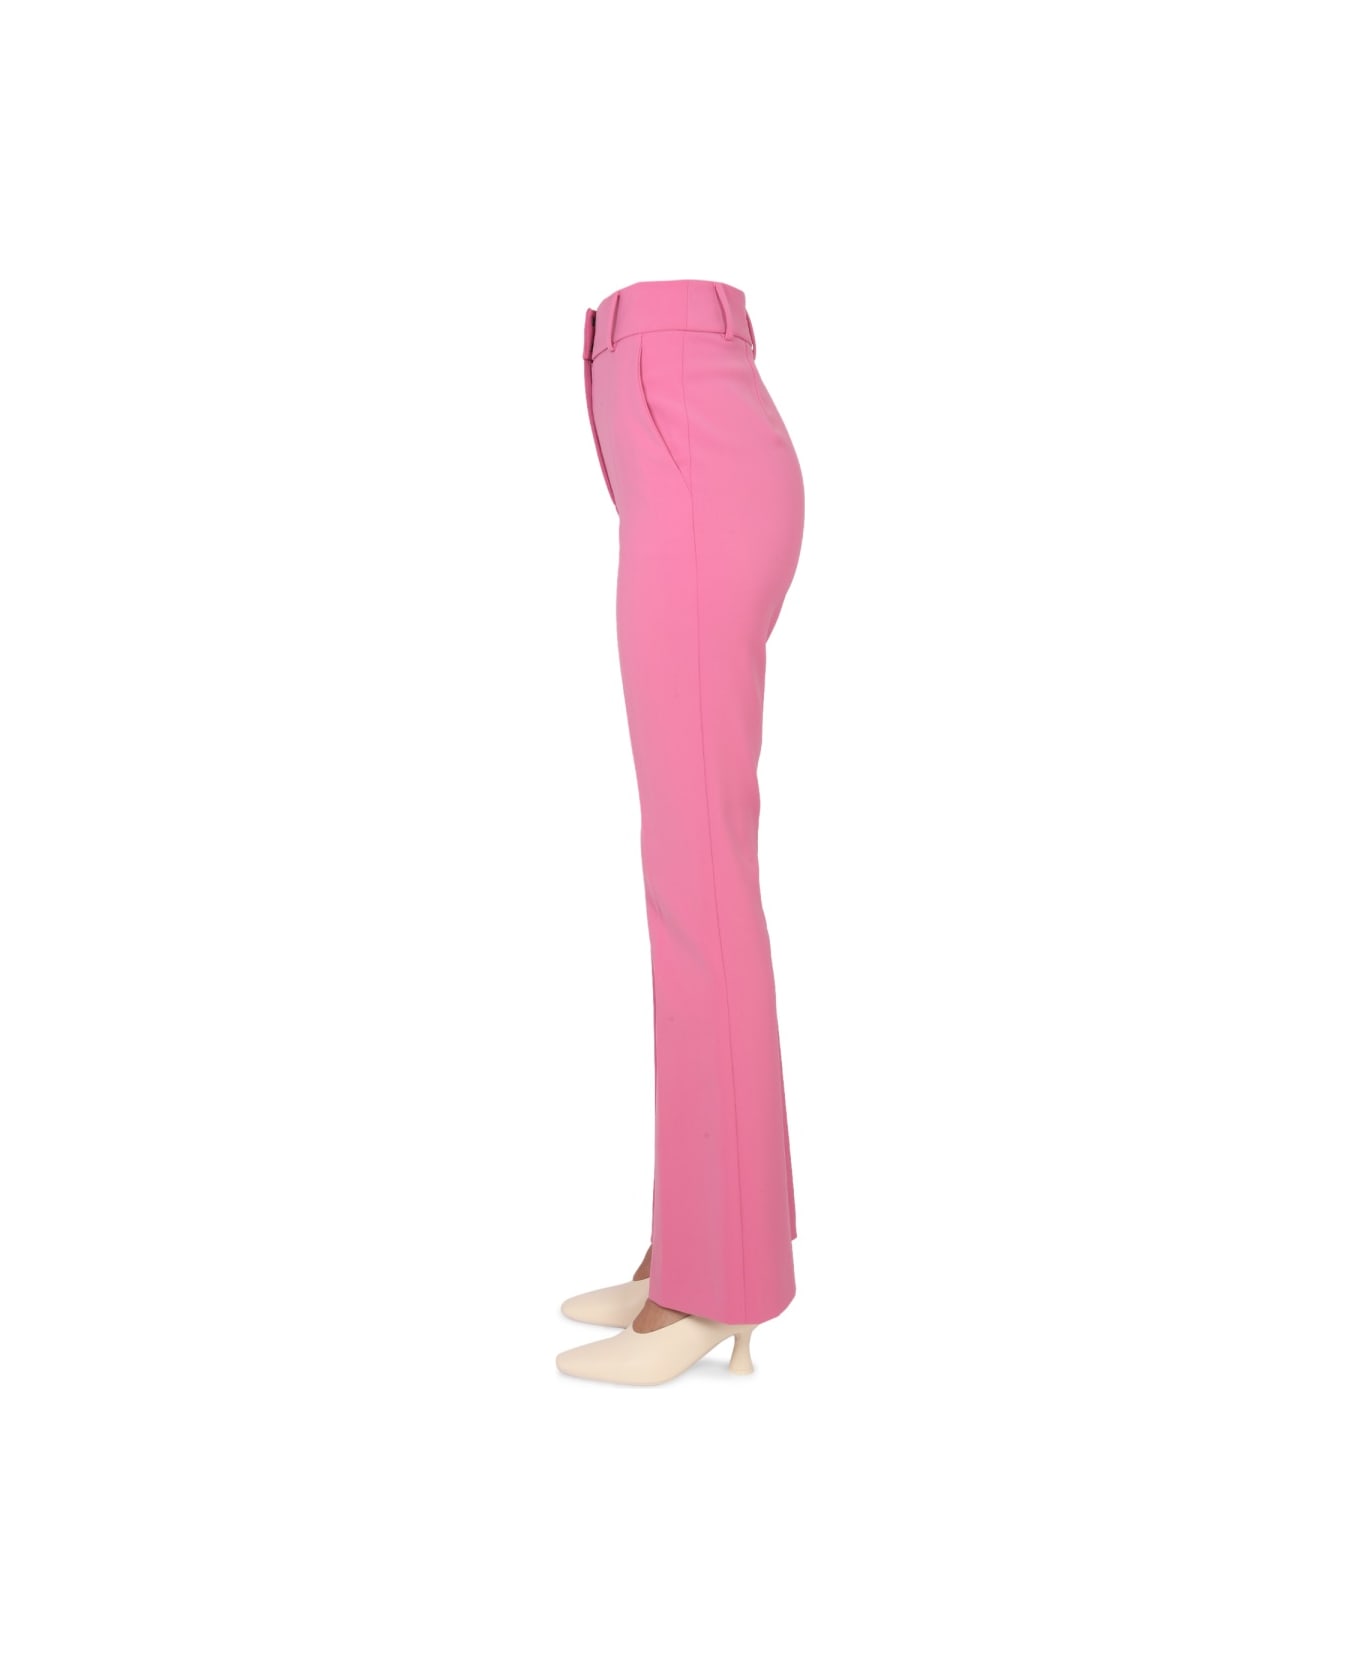 Boutique Moschino Cady Pants - PINK